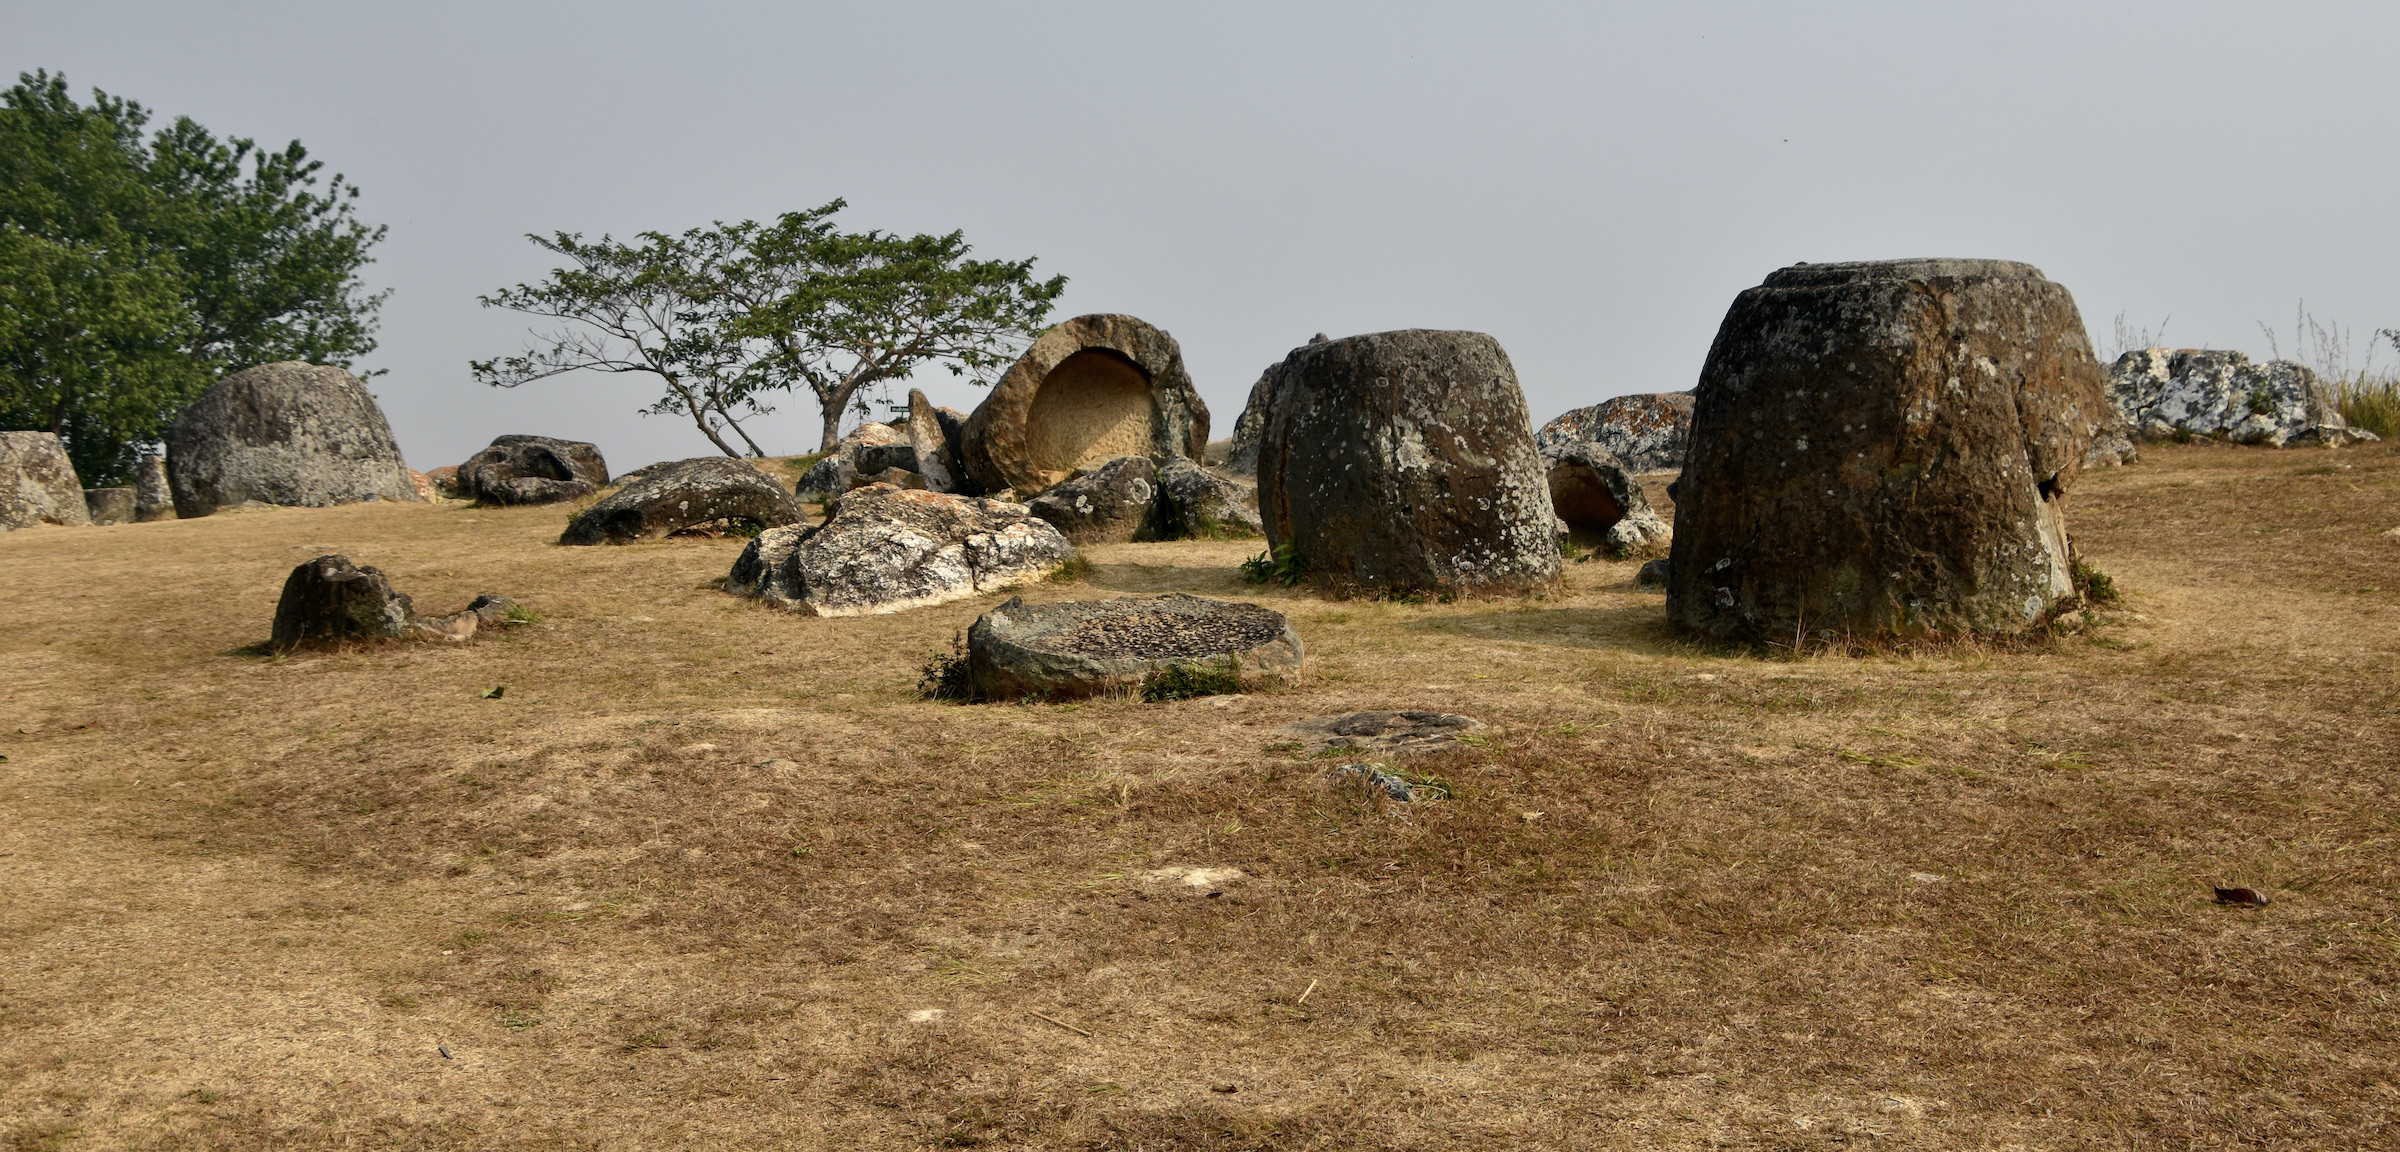 First Look at the Plain of Jars